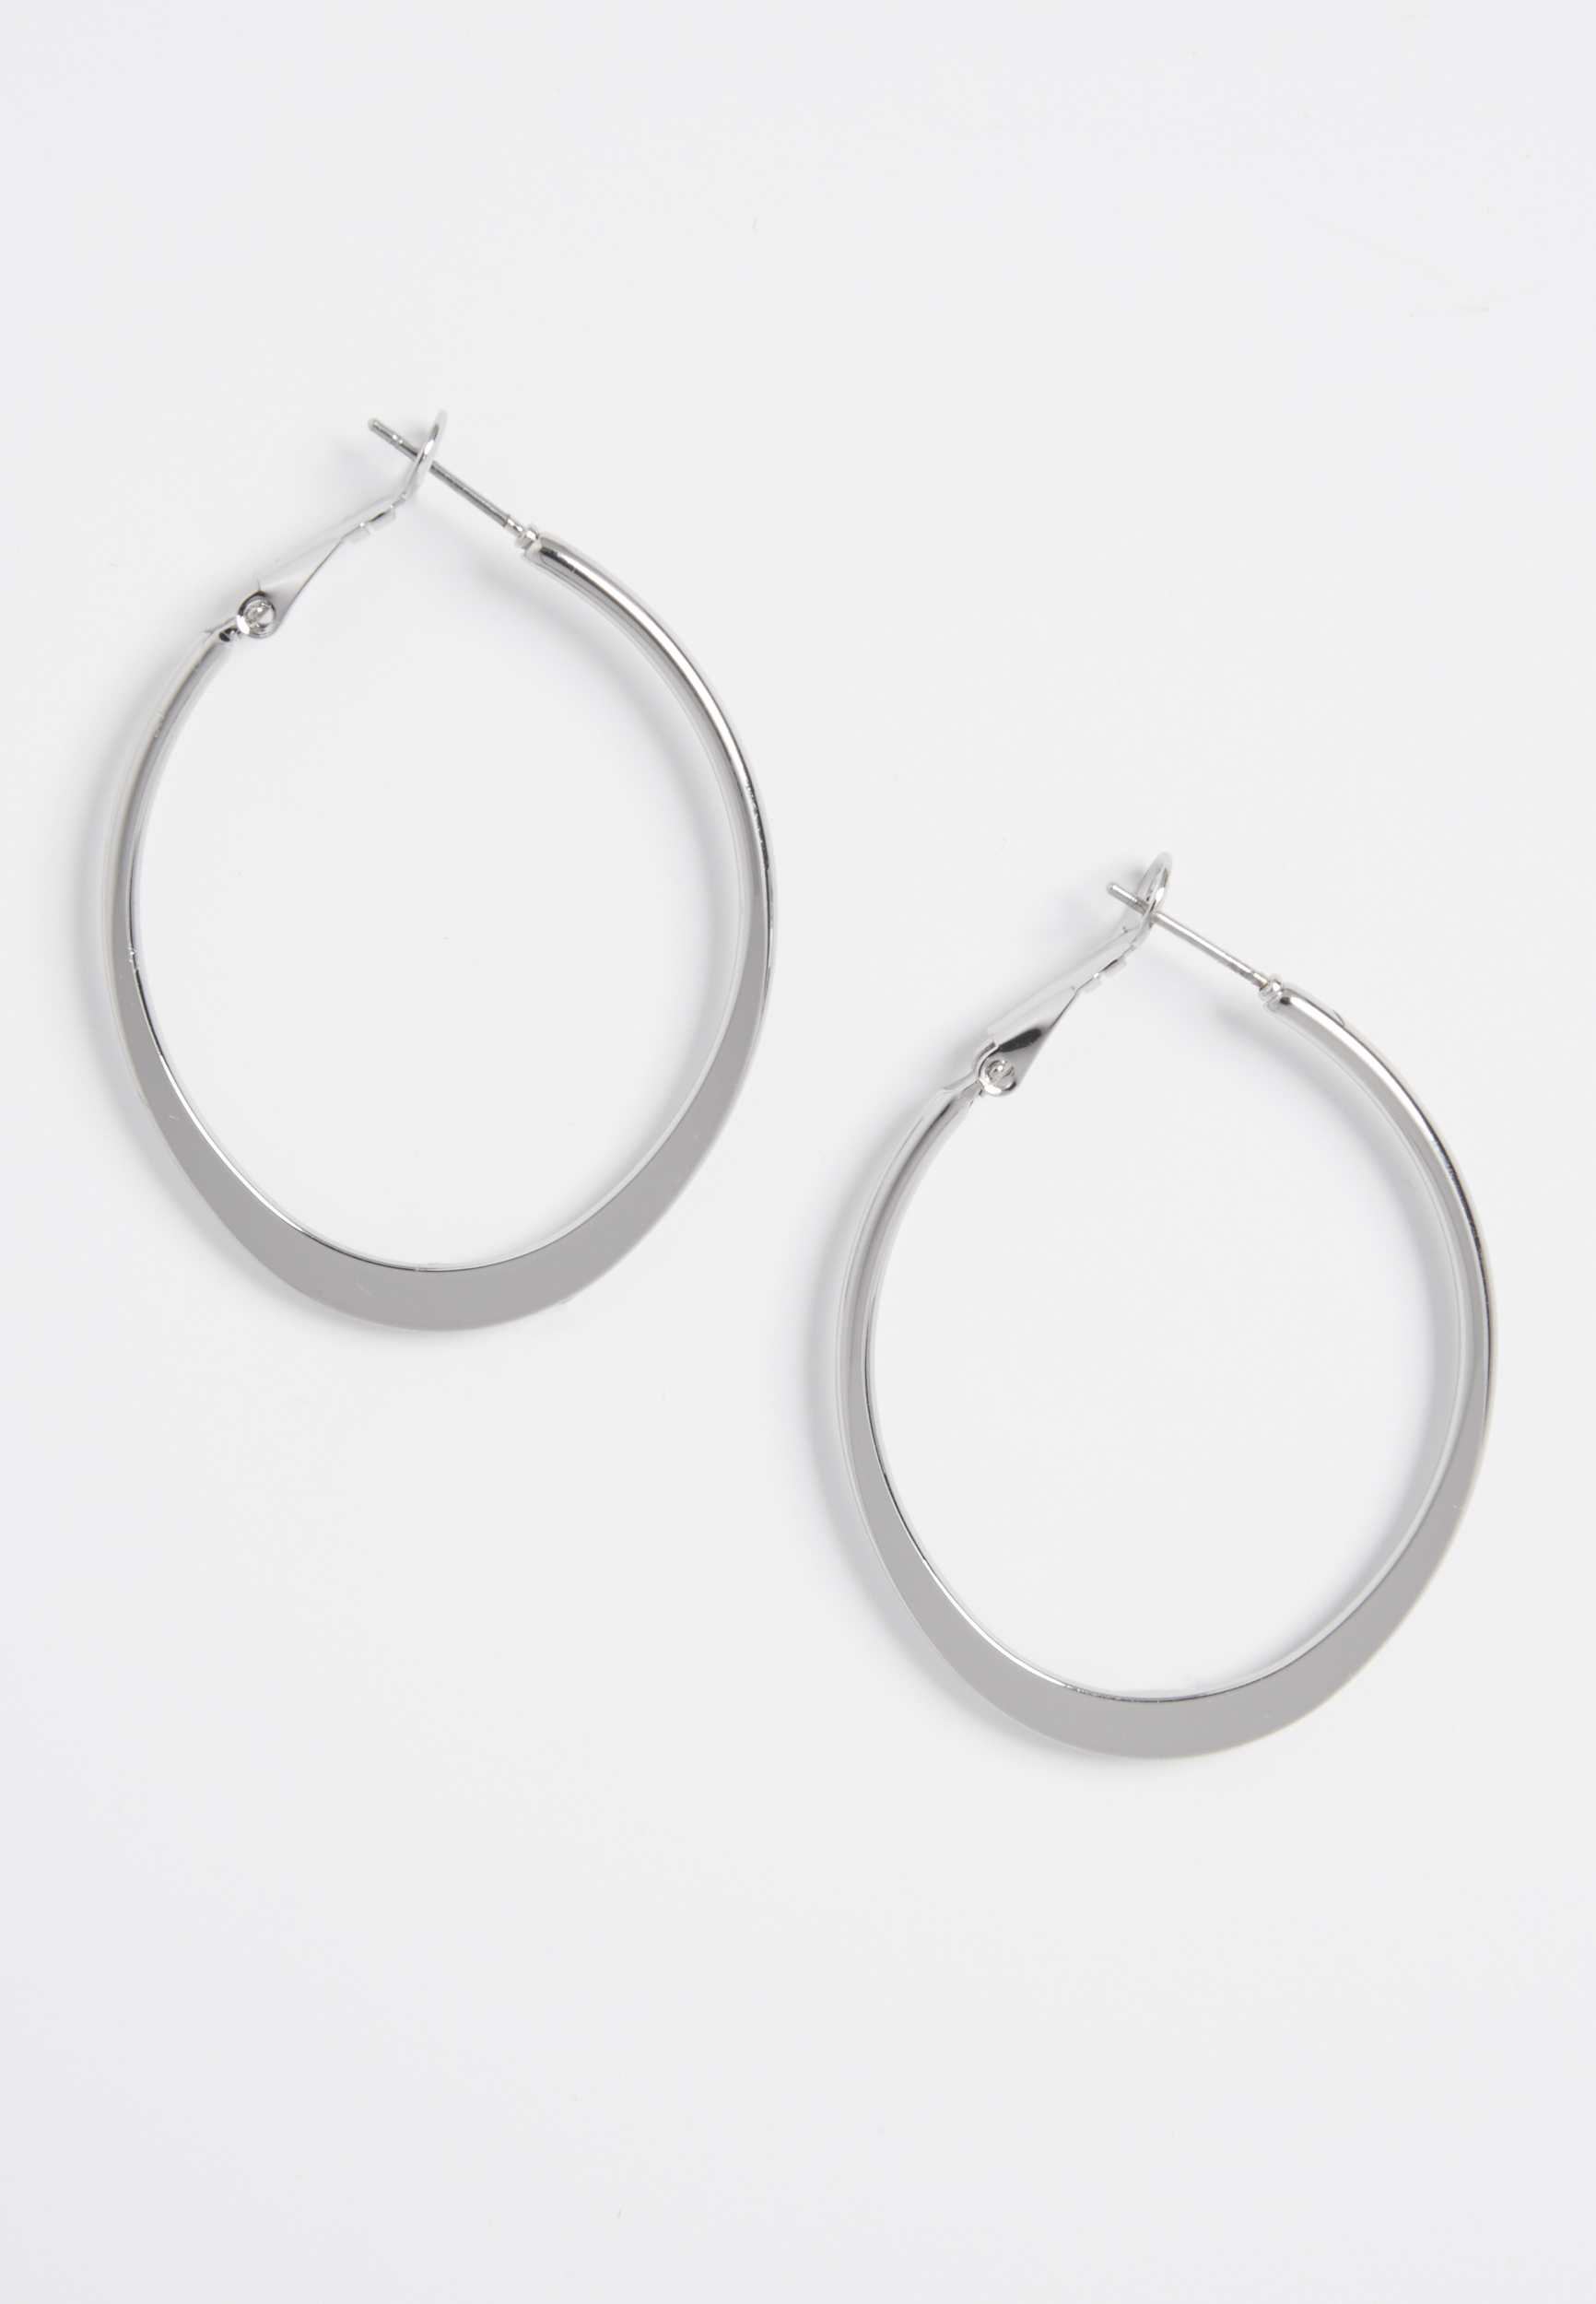 Oblong Shaped Hoop Earrings | maurices